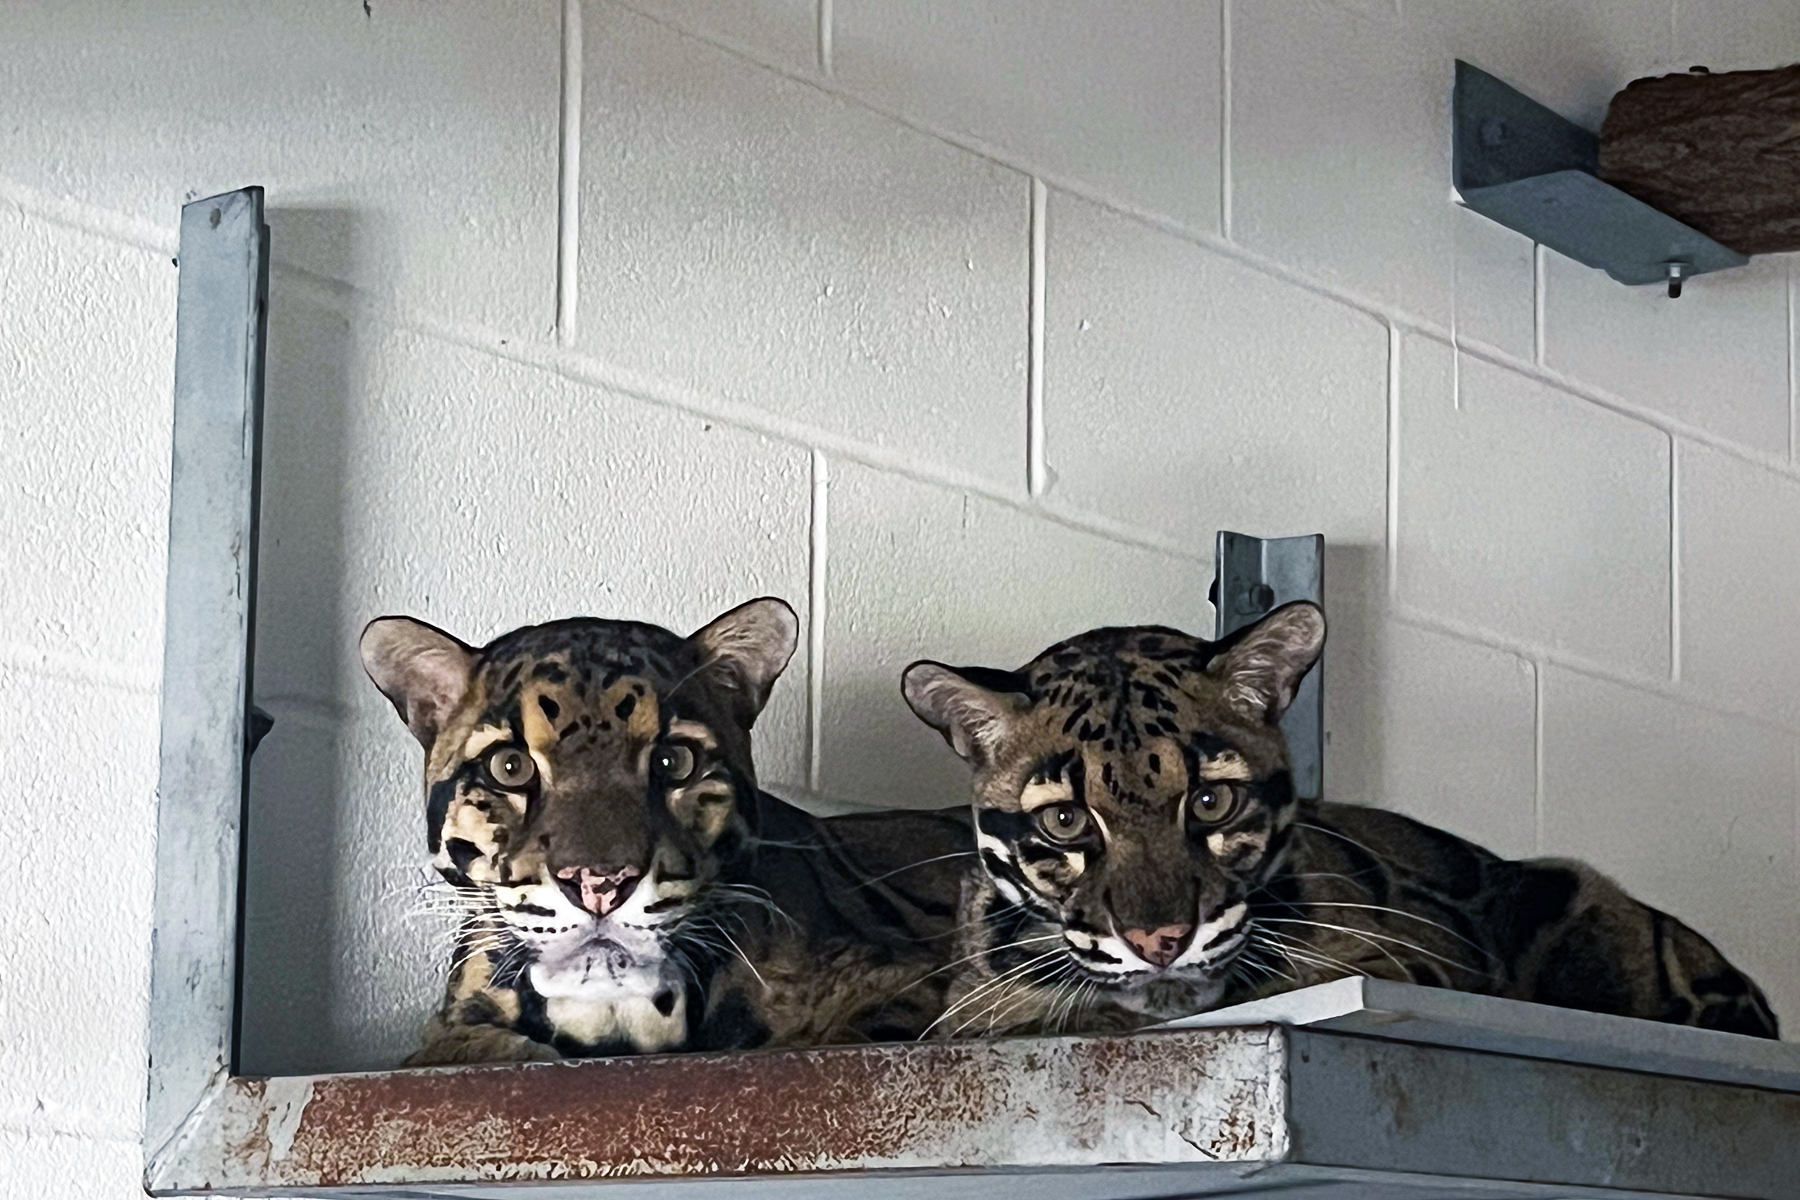 Clouded leopards Masala (left) and Tikka snuggle together in their indoor habitat at the Smithsonian Conservation Biology Institute.